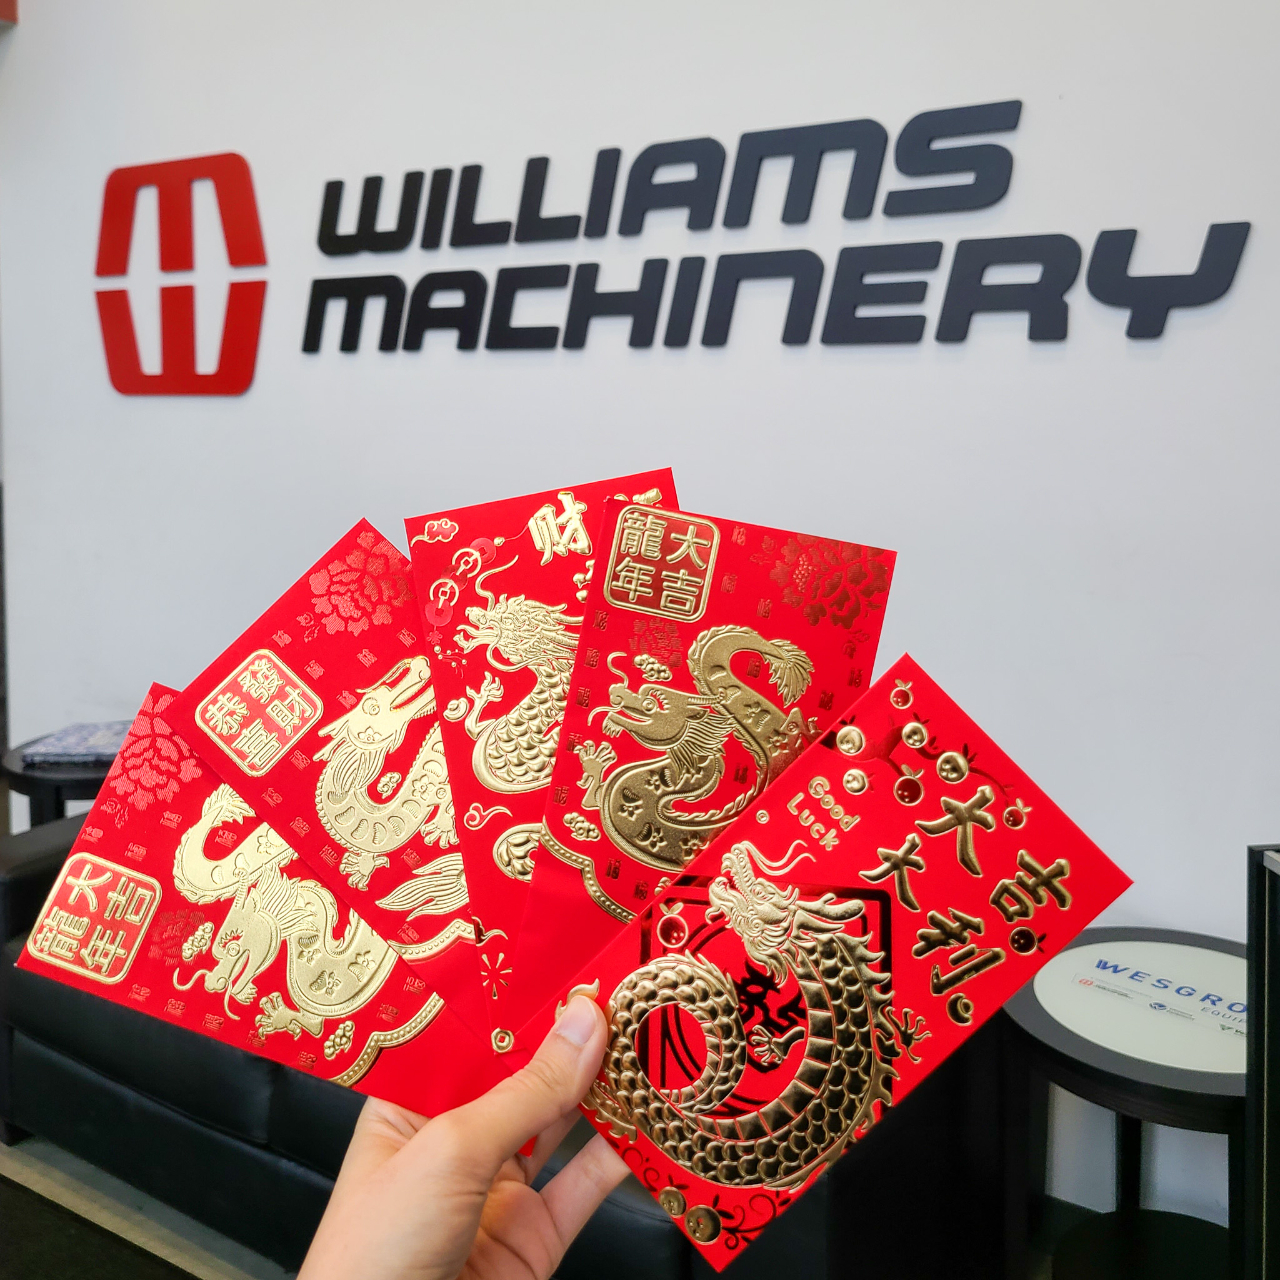 Happy Lunar New Year! 

We're celebrating the Year of the Dragon with red envelopes for all of our team members, filled with chocolate coins. Wishing you a year of happiness, success, and good fortune!